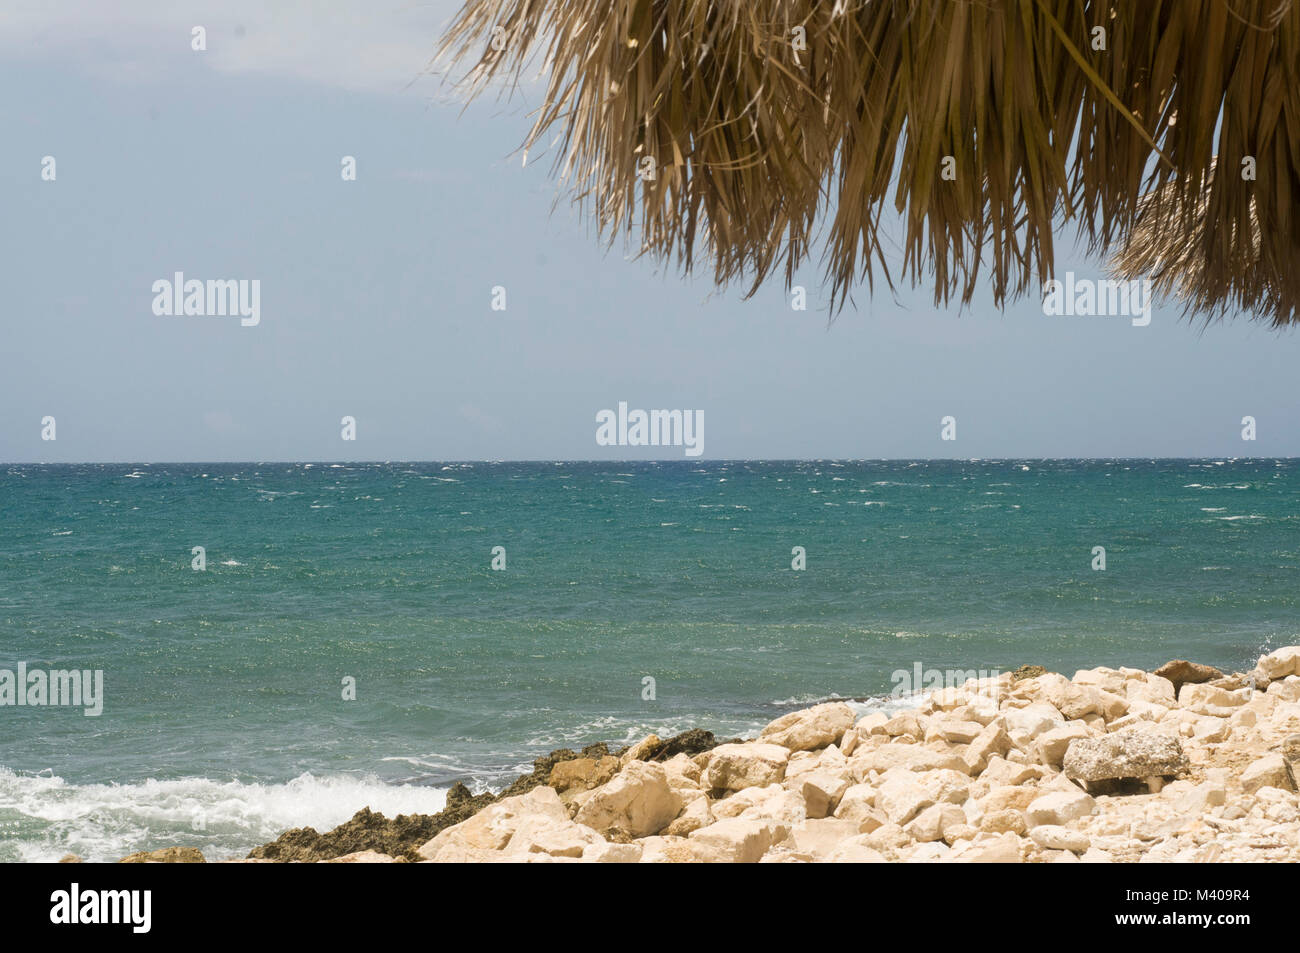 White sandy beaches in Montego Bay, Jamaica. Lots of vegetation and ocean views. Island life at its finest, picturesque, and no people in the photos . Stock Photo